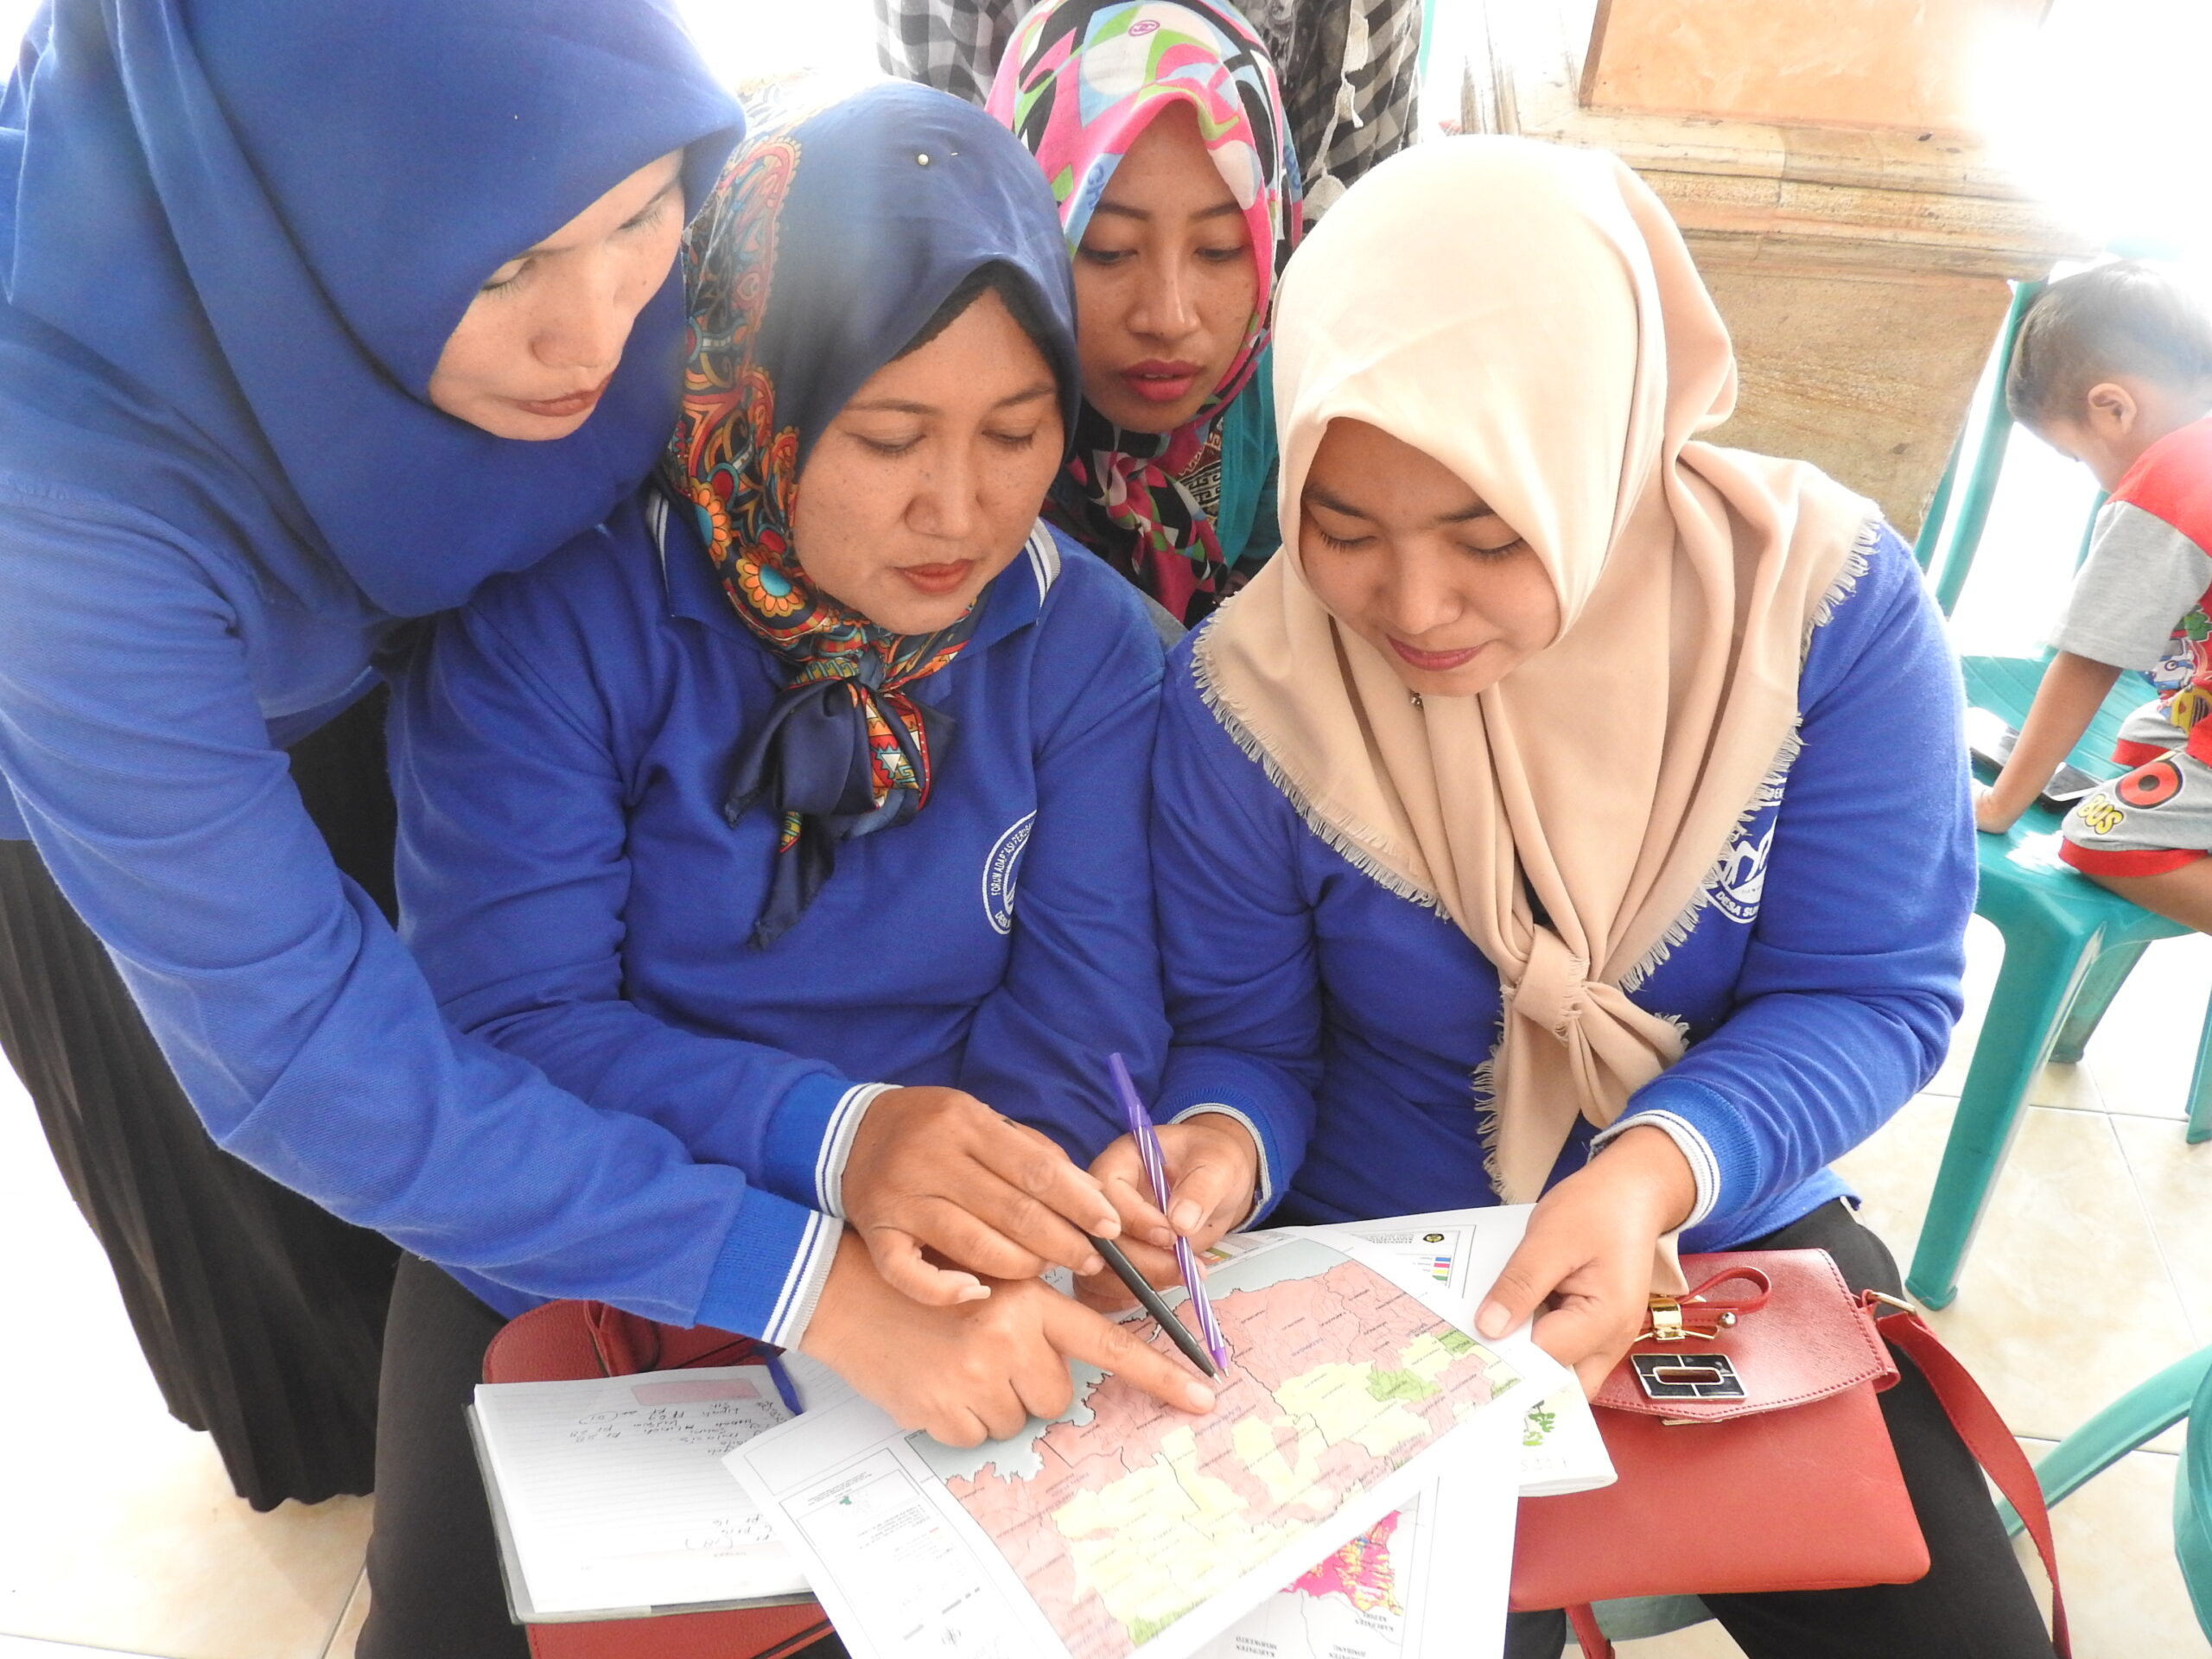 Community members in Sumberagung are involved in determining action to build resilience in their area. Photo: USAID APIK documentation